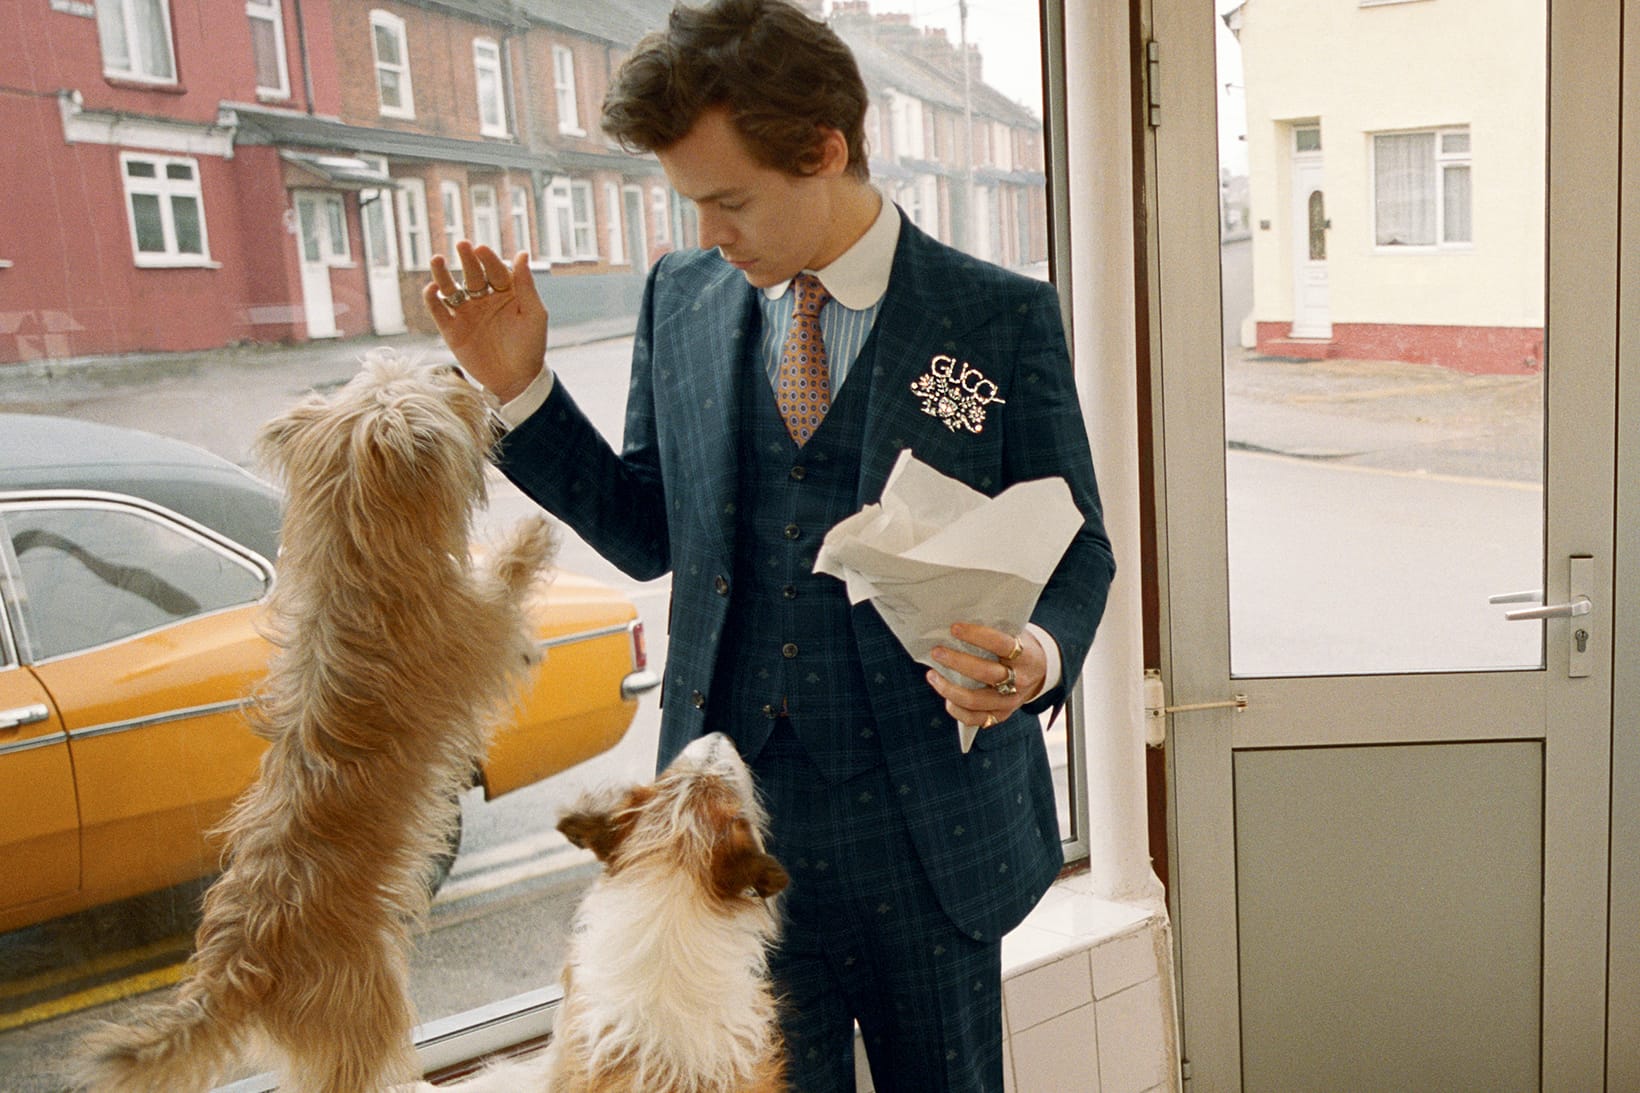 gucci campaign 2018 harry styles